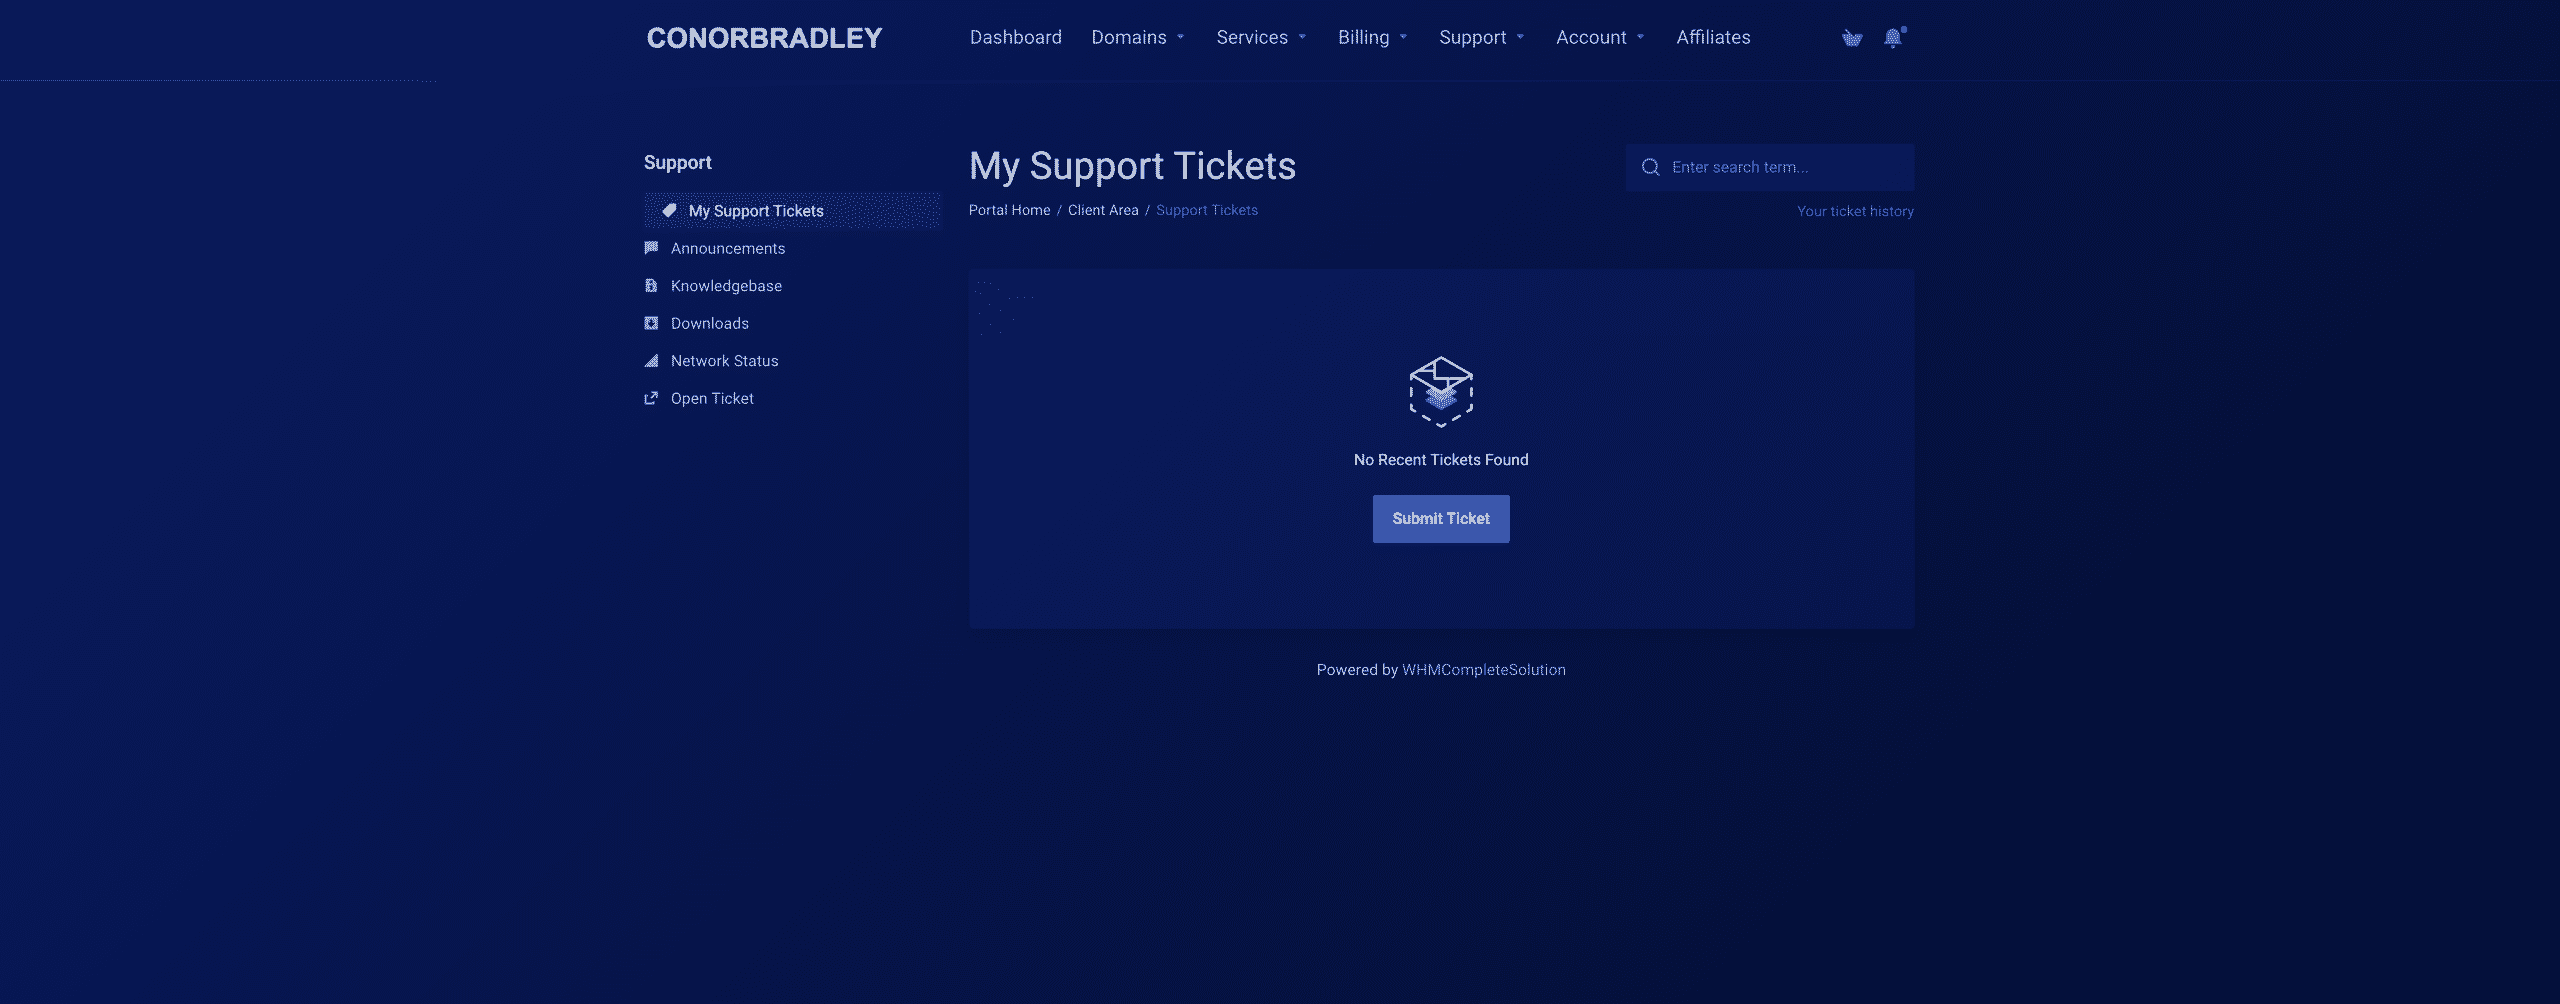 Viewing my support tickets on the client portal conor bradley digital agency